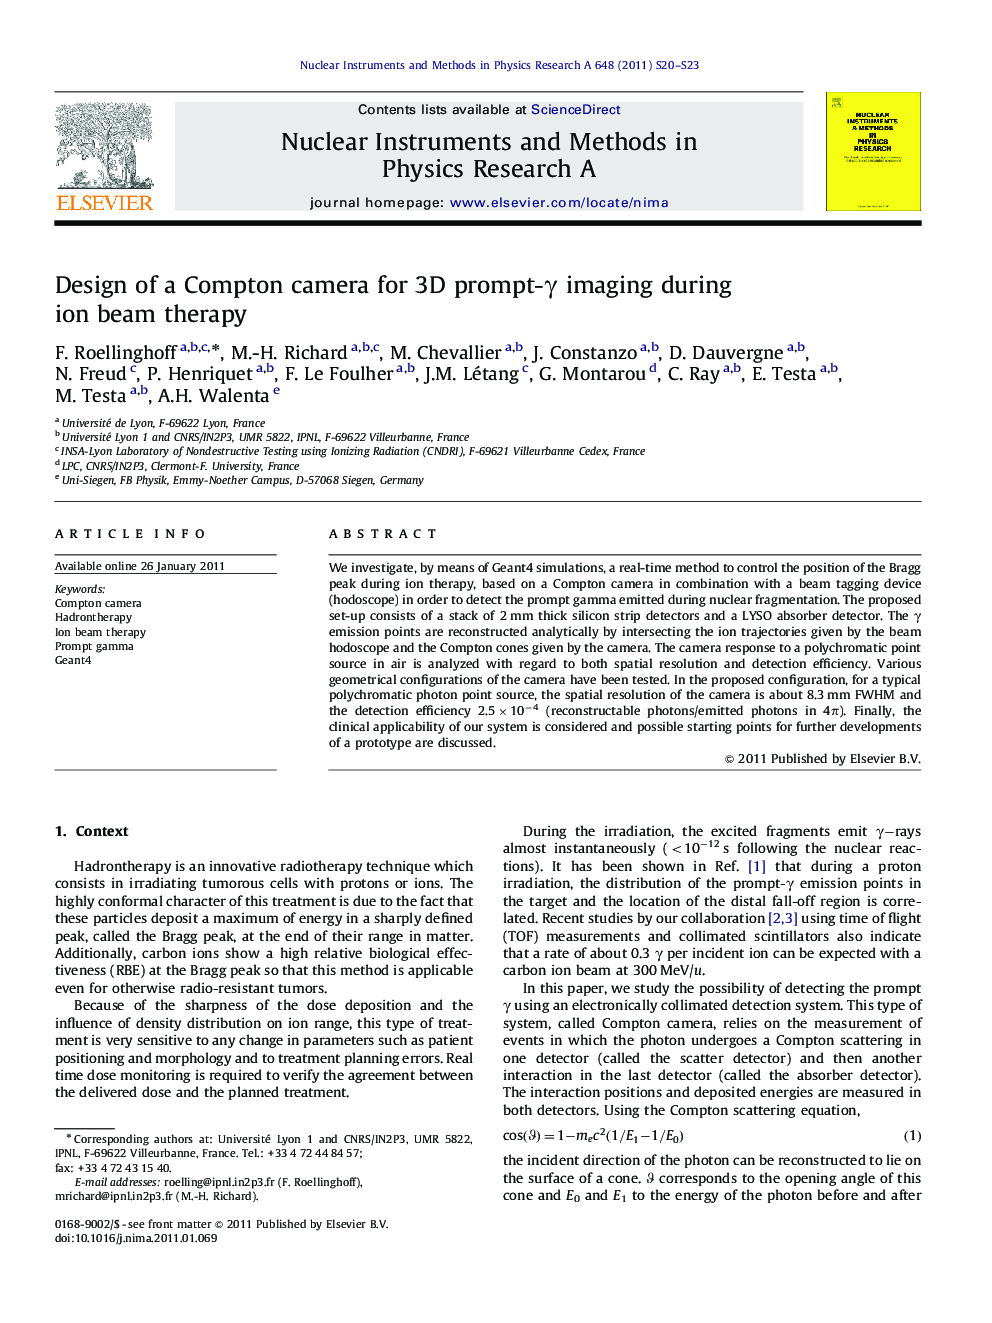 Design of a Compton camera for 3D prompt-γγ imaging during ion beam therapy